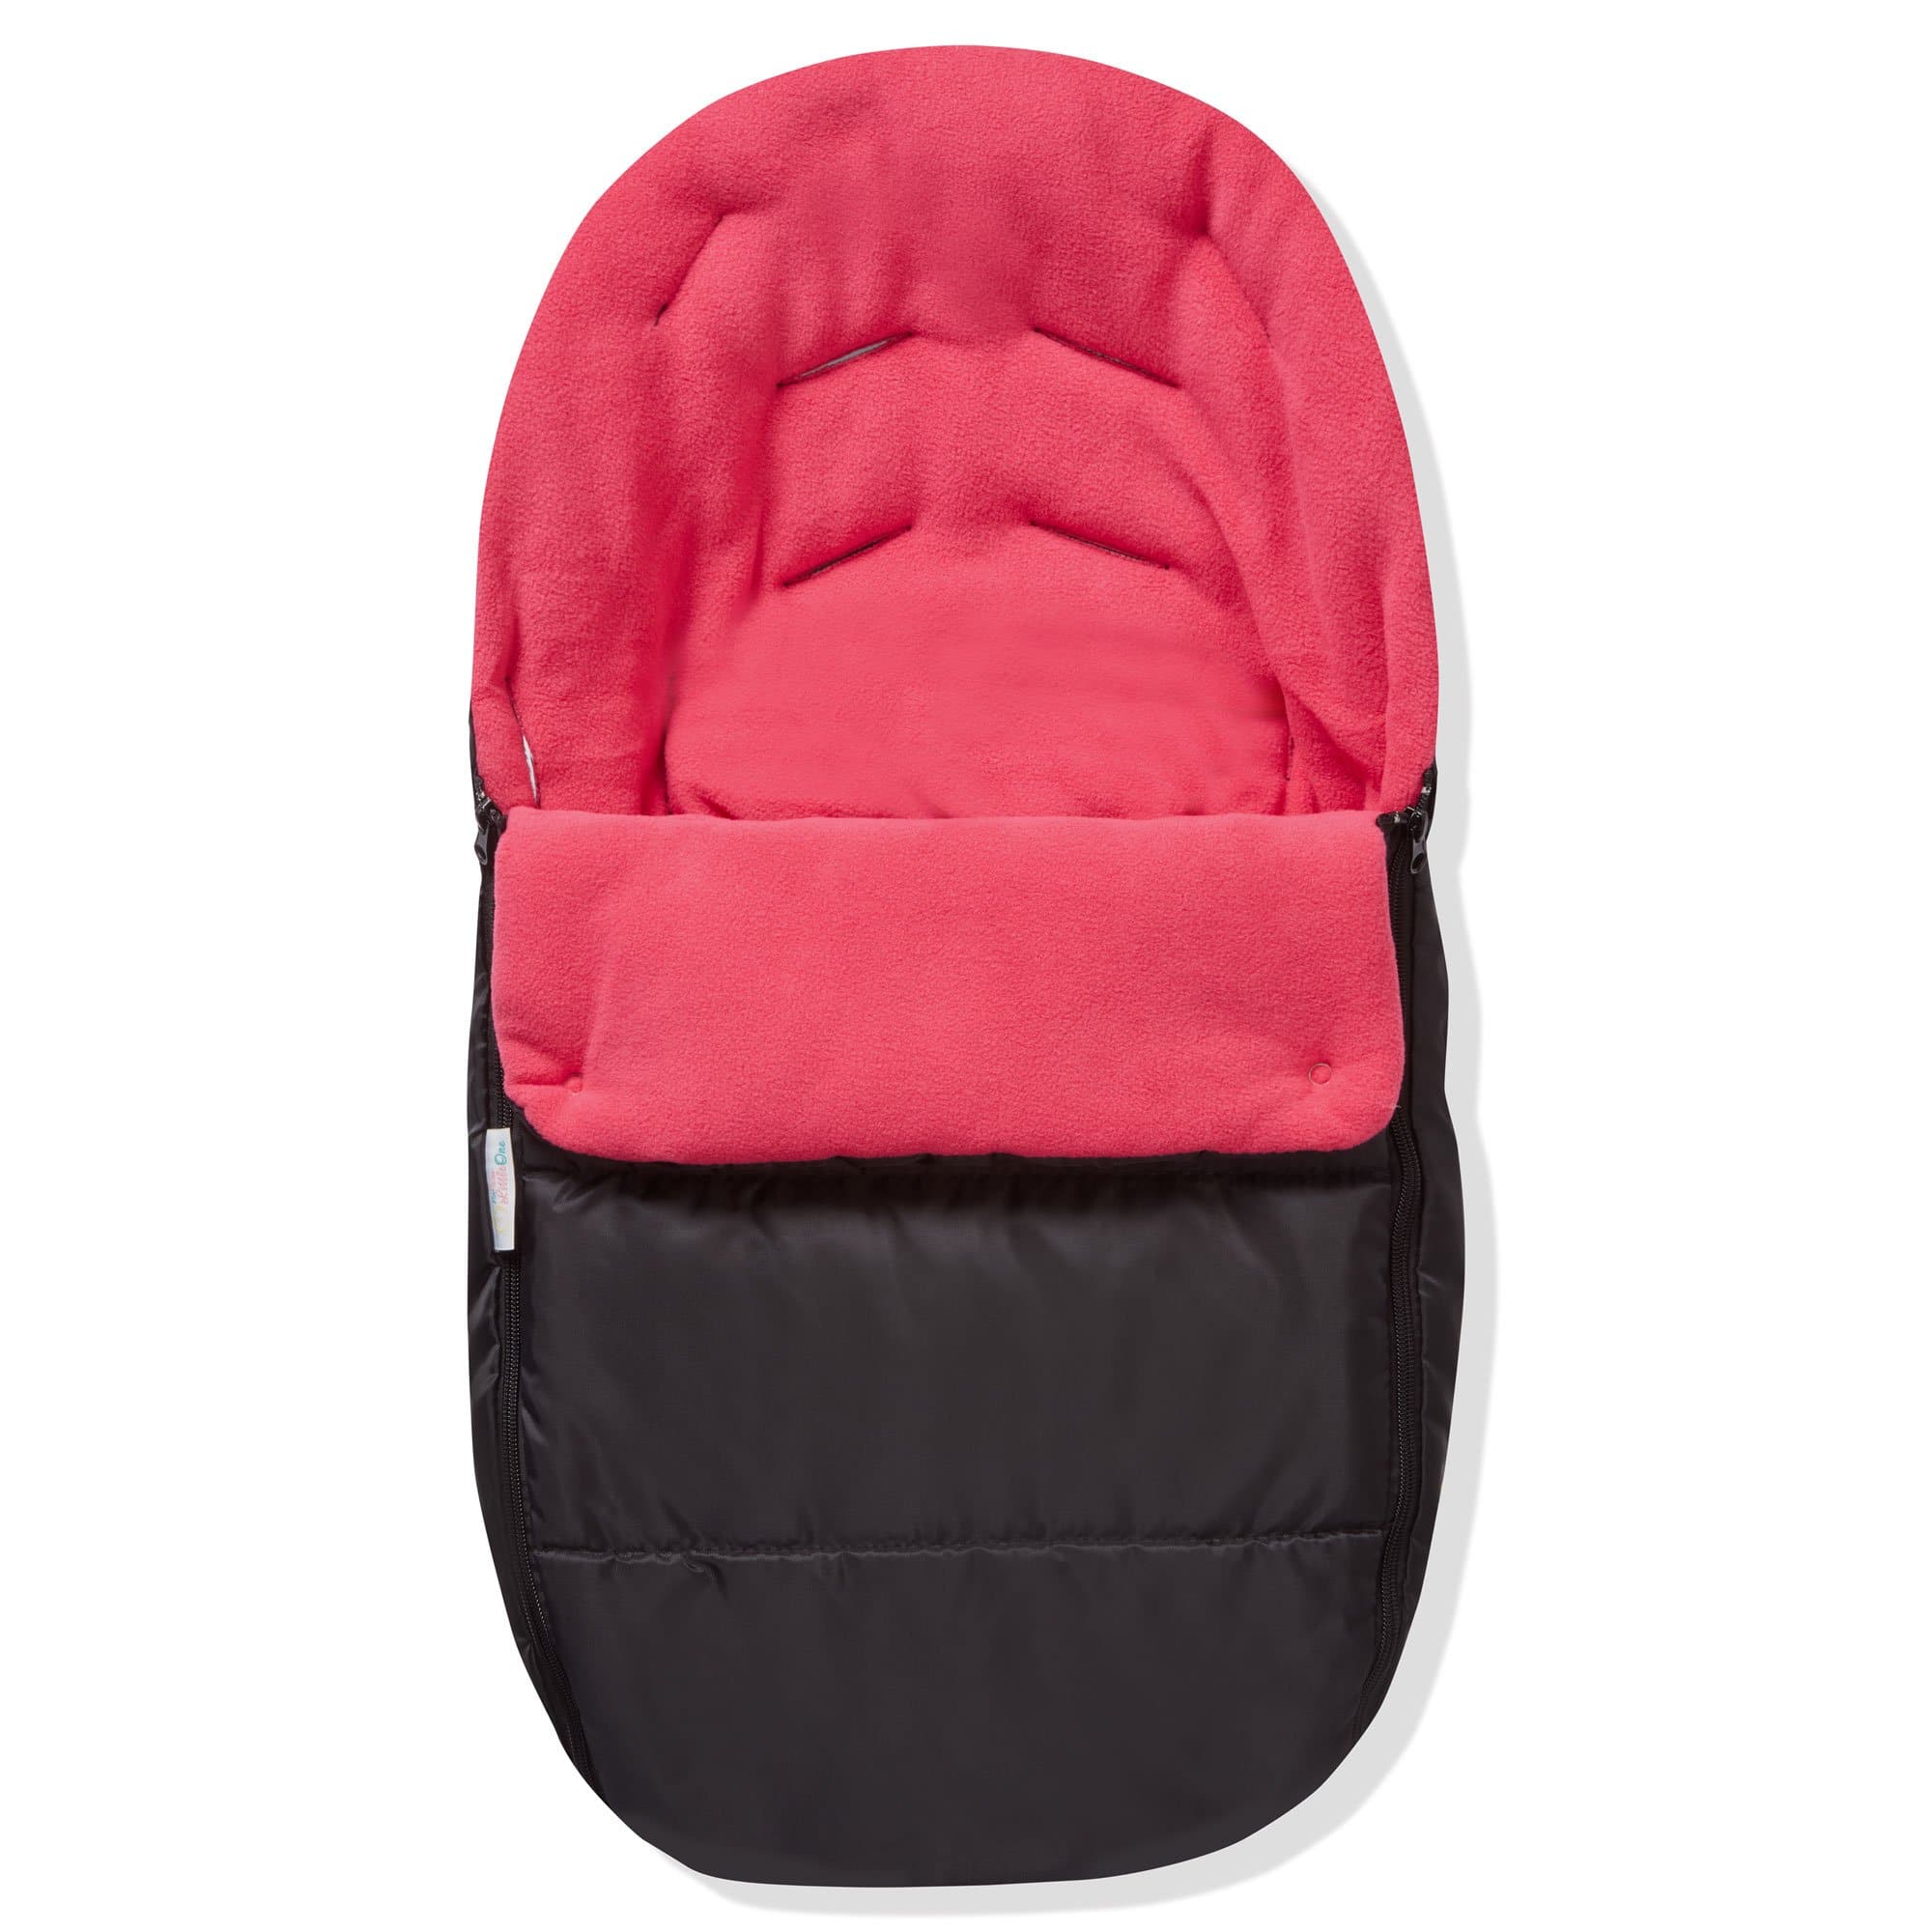 Premium Car Seat Footmuff / Cosy Toes Compatible with Babylo - Pink Rose / Fits All Models | For Your Little One